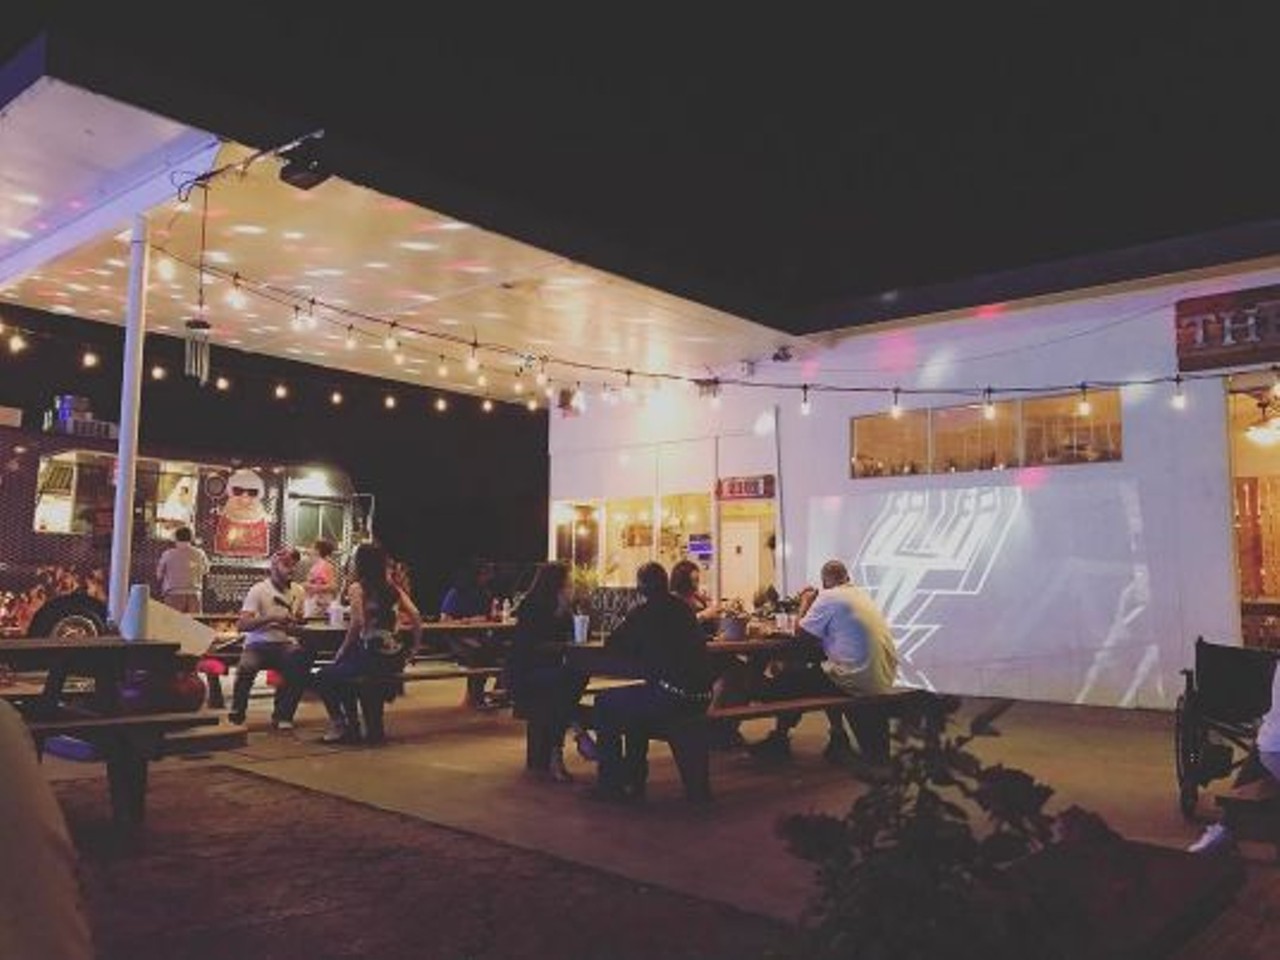 The Rose Bush
2301 San Pedro Ave., (210) 621-8908
The Rose Bush is a perfect stop for a Friday night out with friends. Take a six pack to this outdoor eating area and spend the night sipping brews and tasting delicious eats from the food trucks. 
Photo via Instagram, felinesxflowers